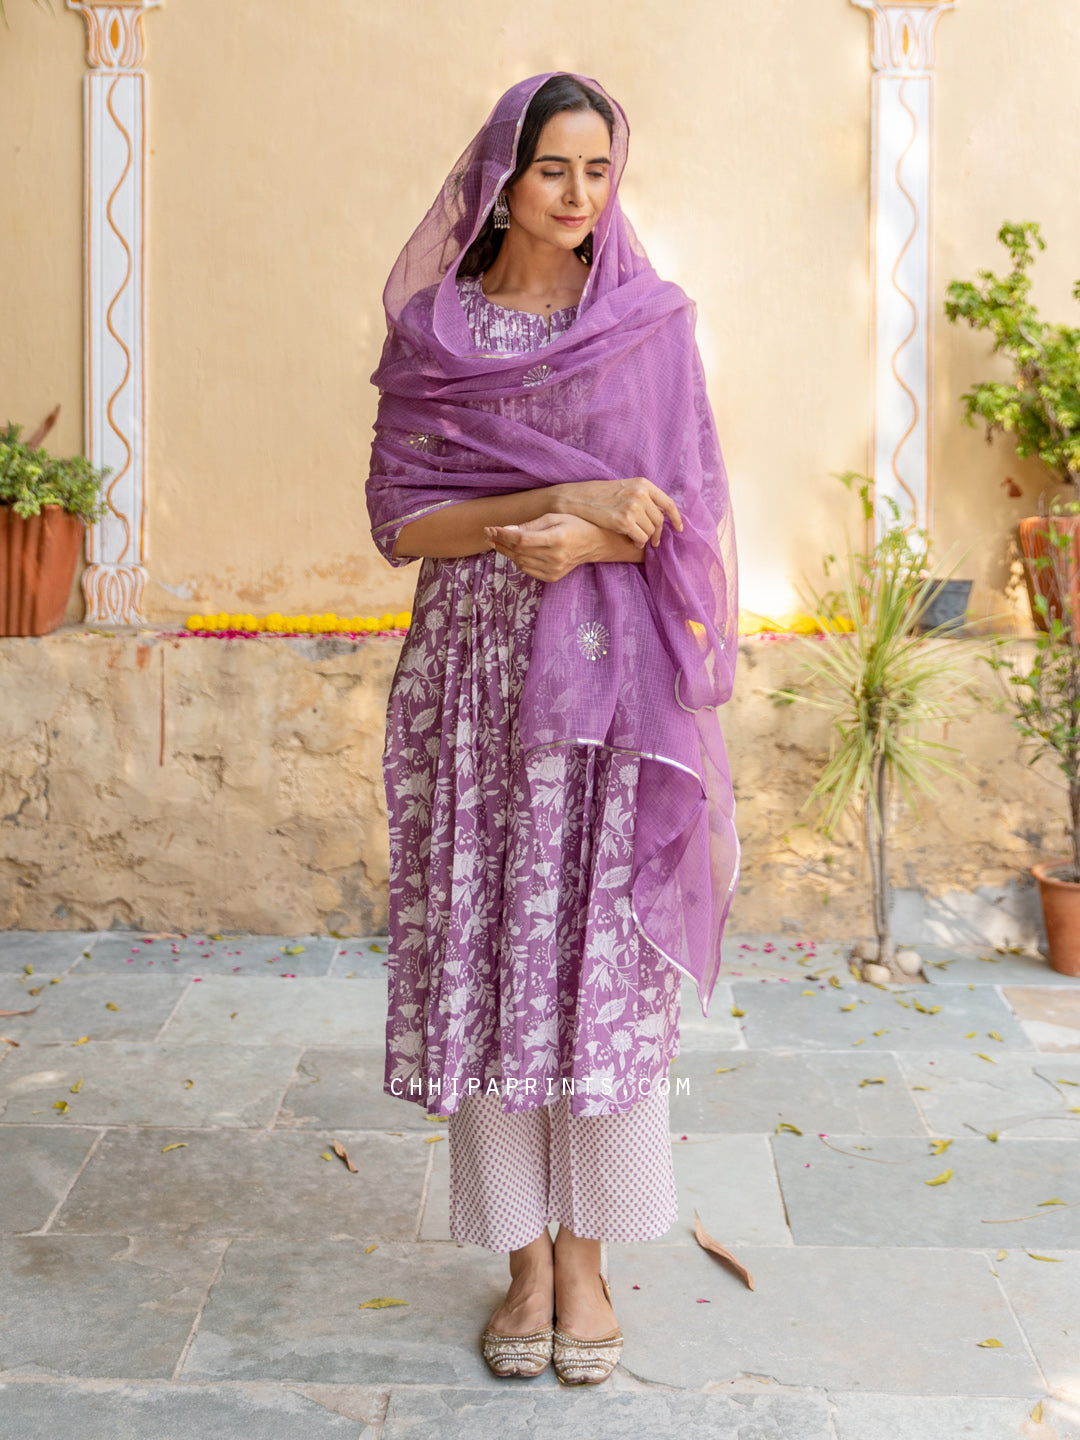 Cotton Shell Tuck Jaal Print Suit Set in Lavender